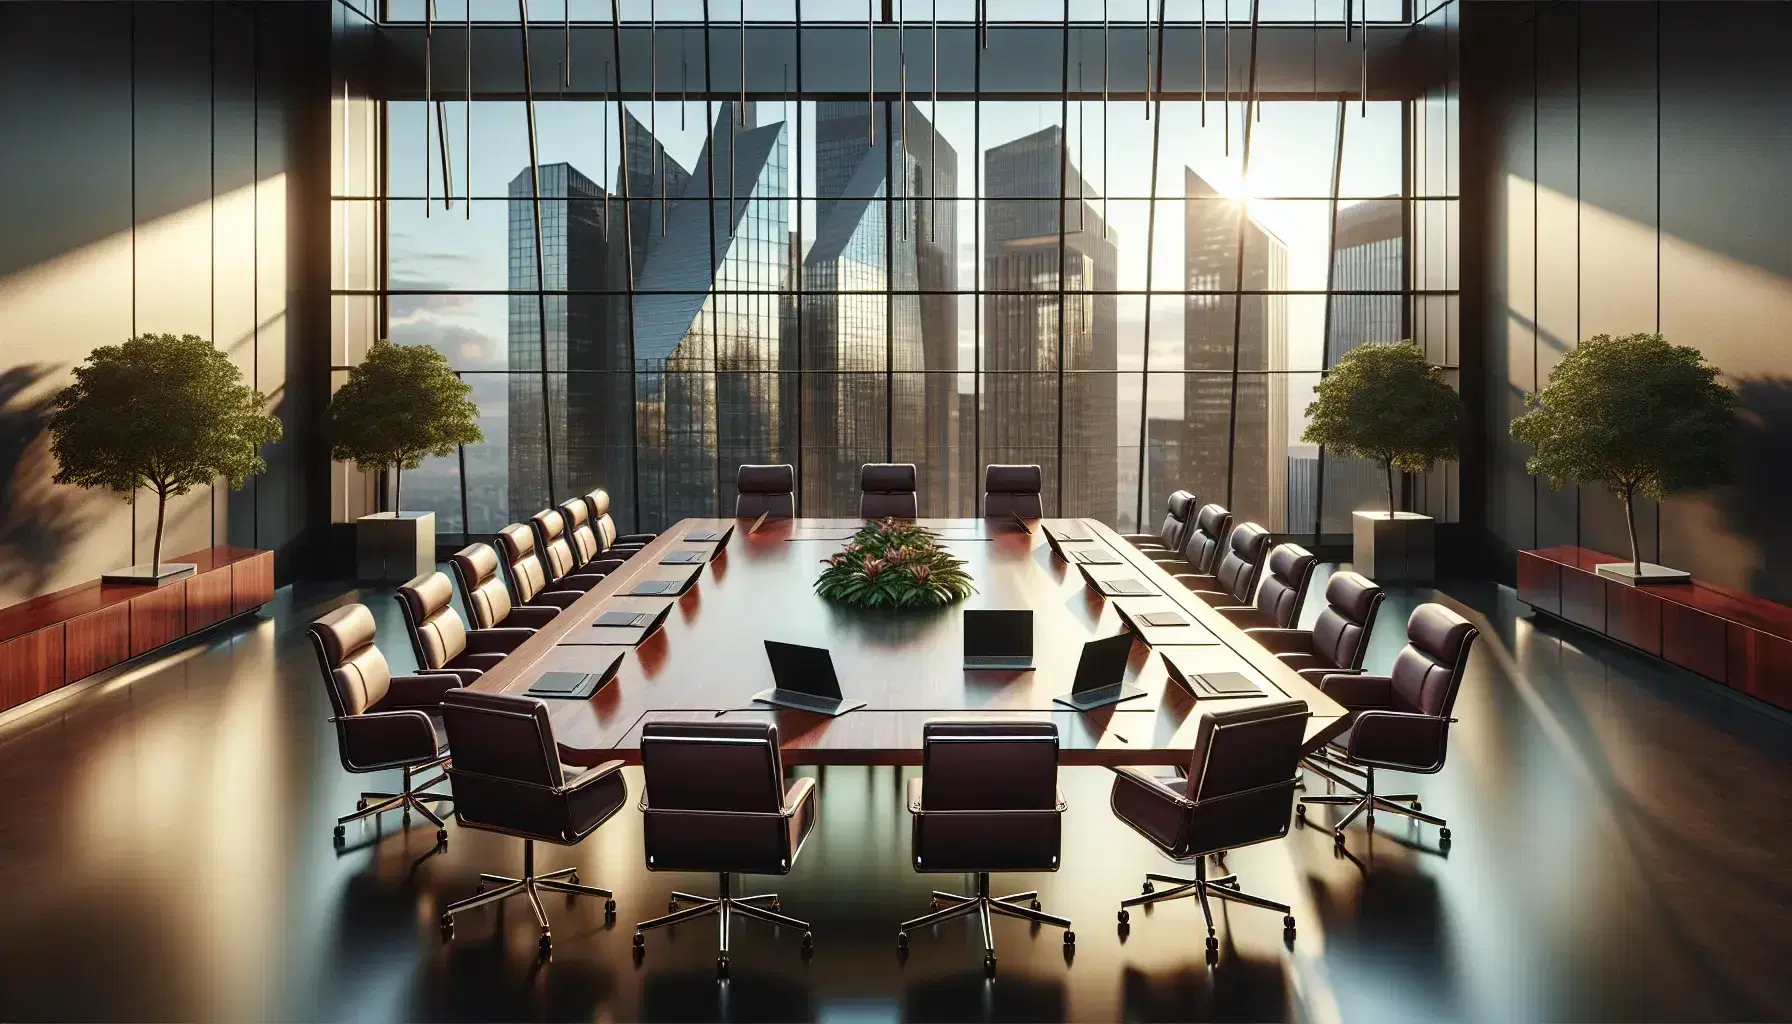 Elegant boardroom with a large oval wooden table, burgundy leather chairs, modern laptops, and a city skyline view through a floor-to-ceiling window.